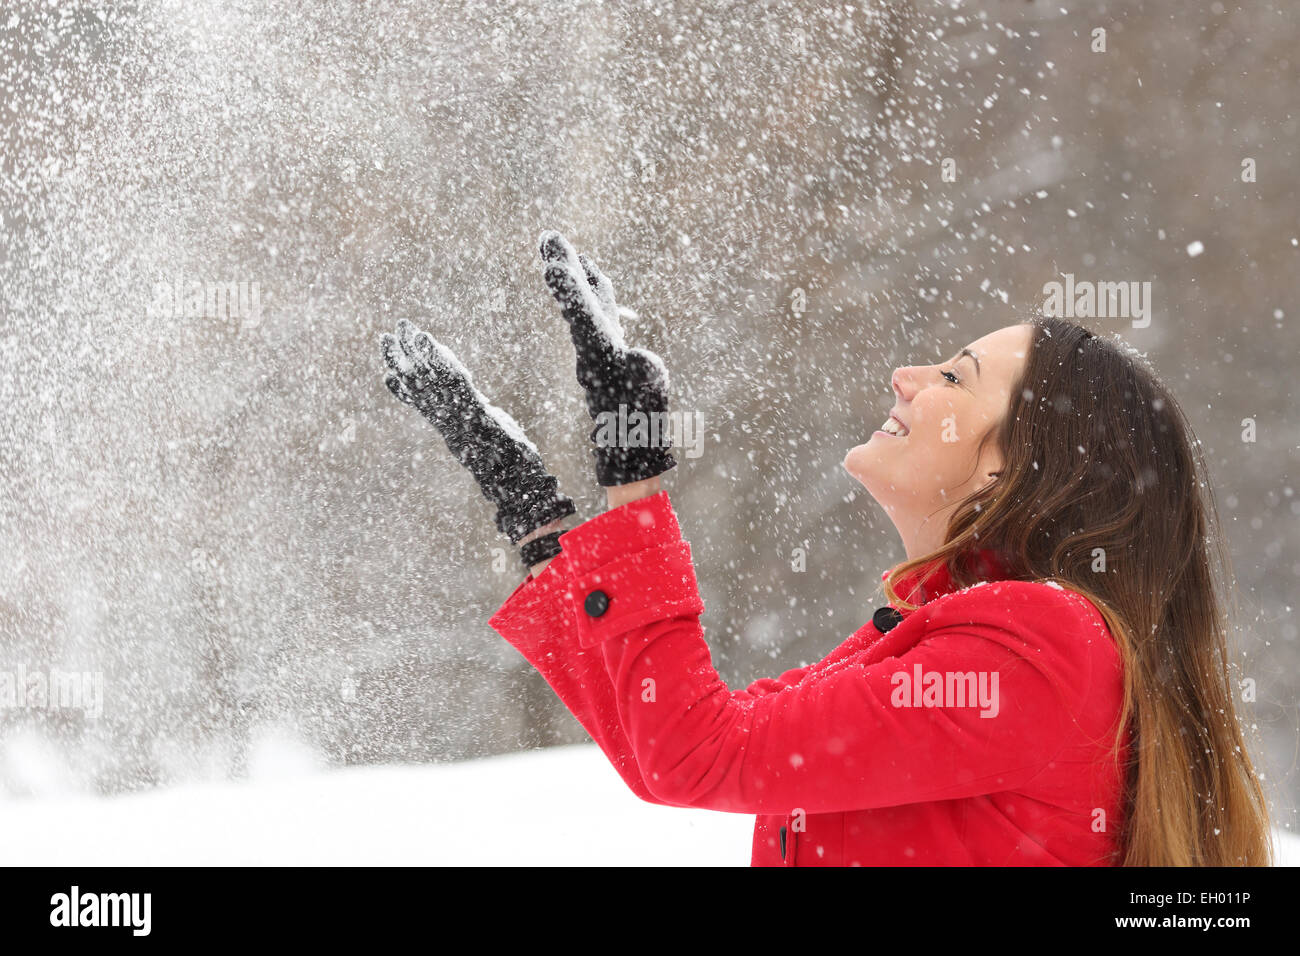 Woman wearing a red jacket throwing snow in the air in winter holidays Stock Photo